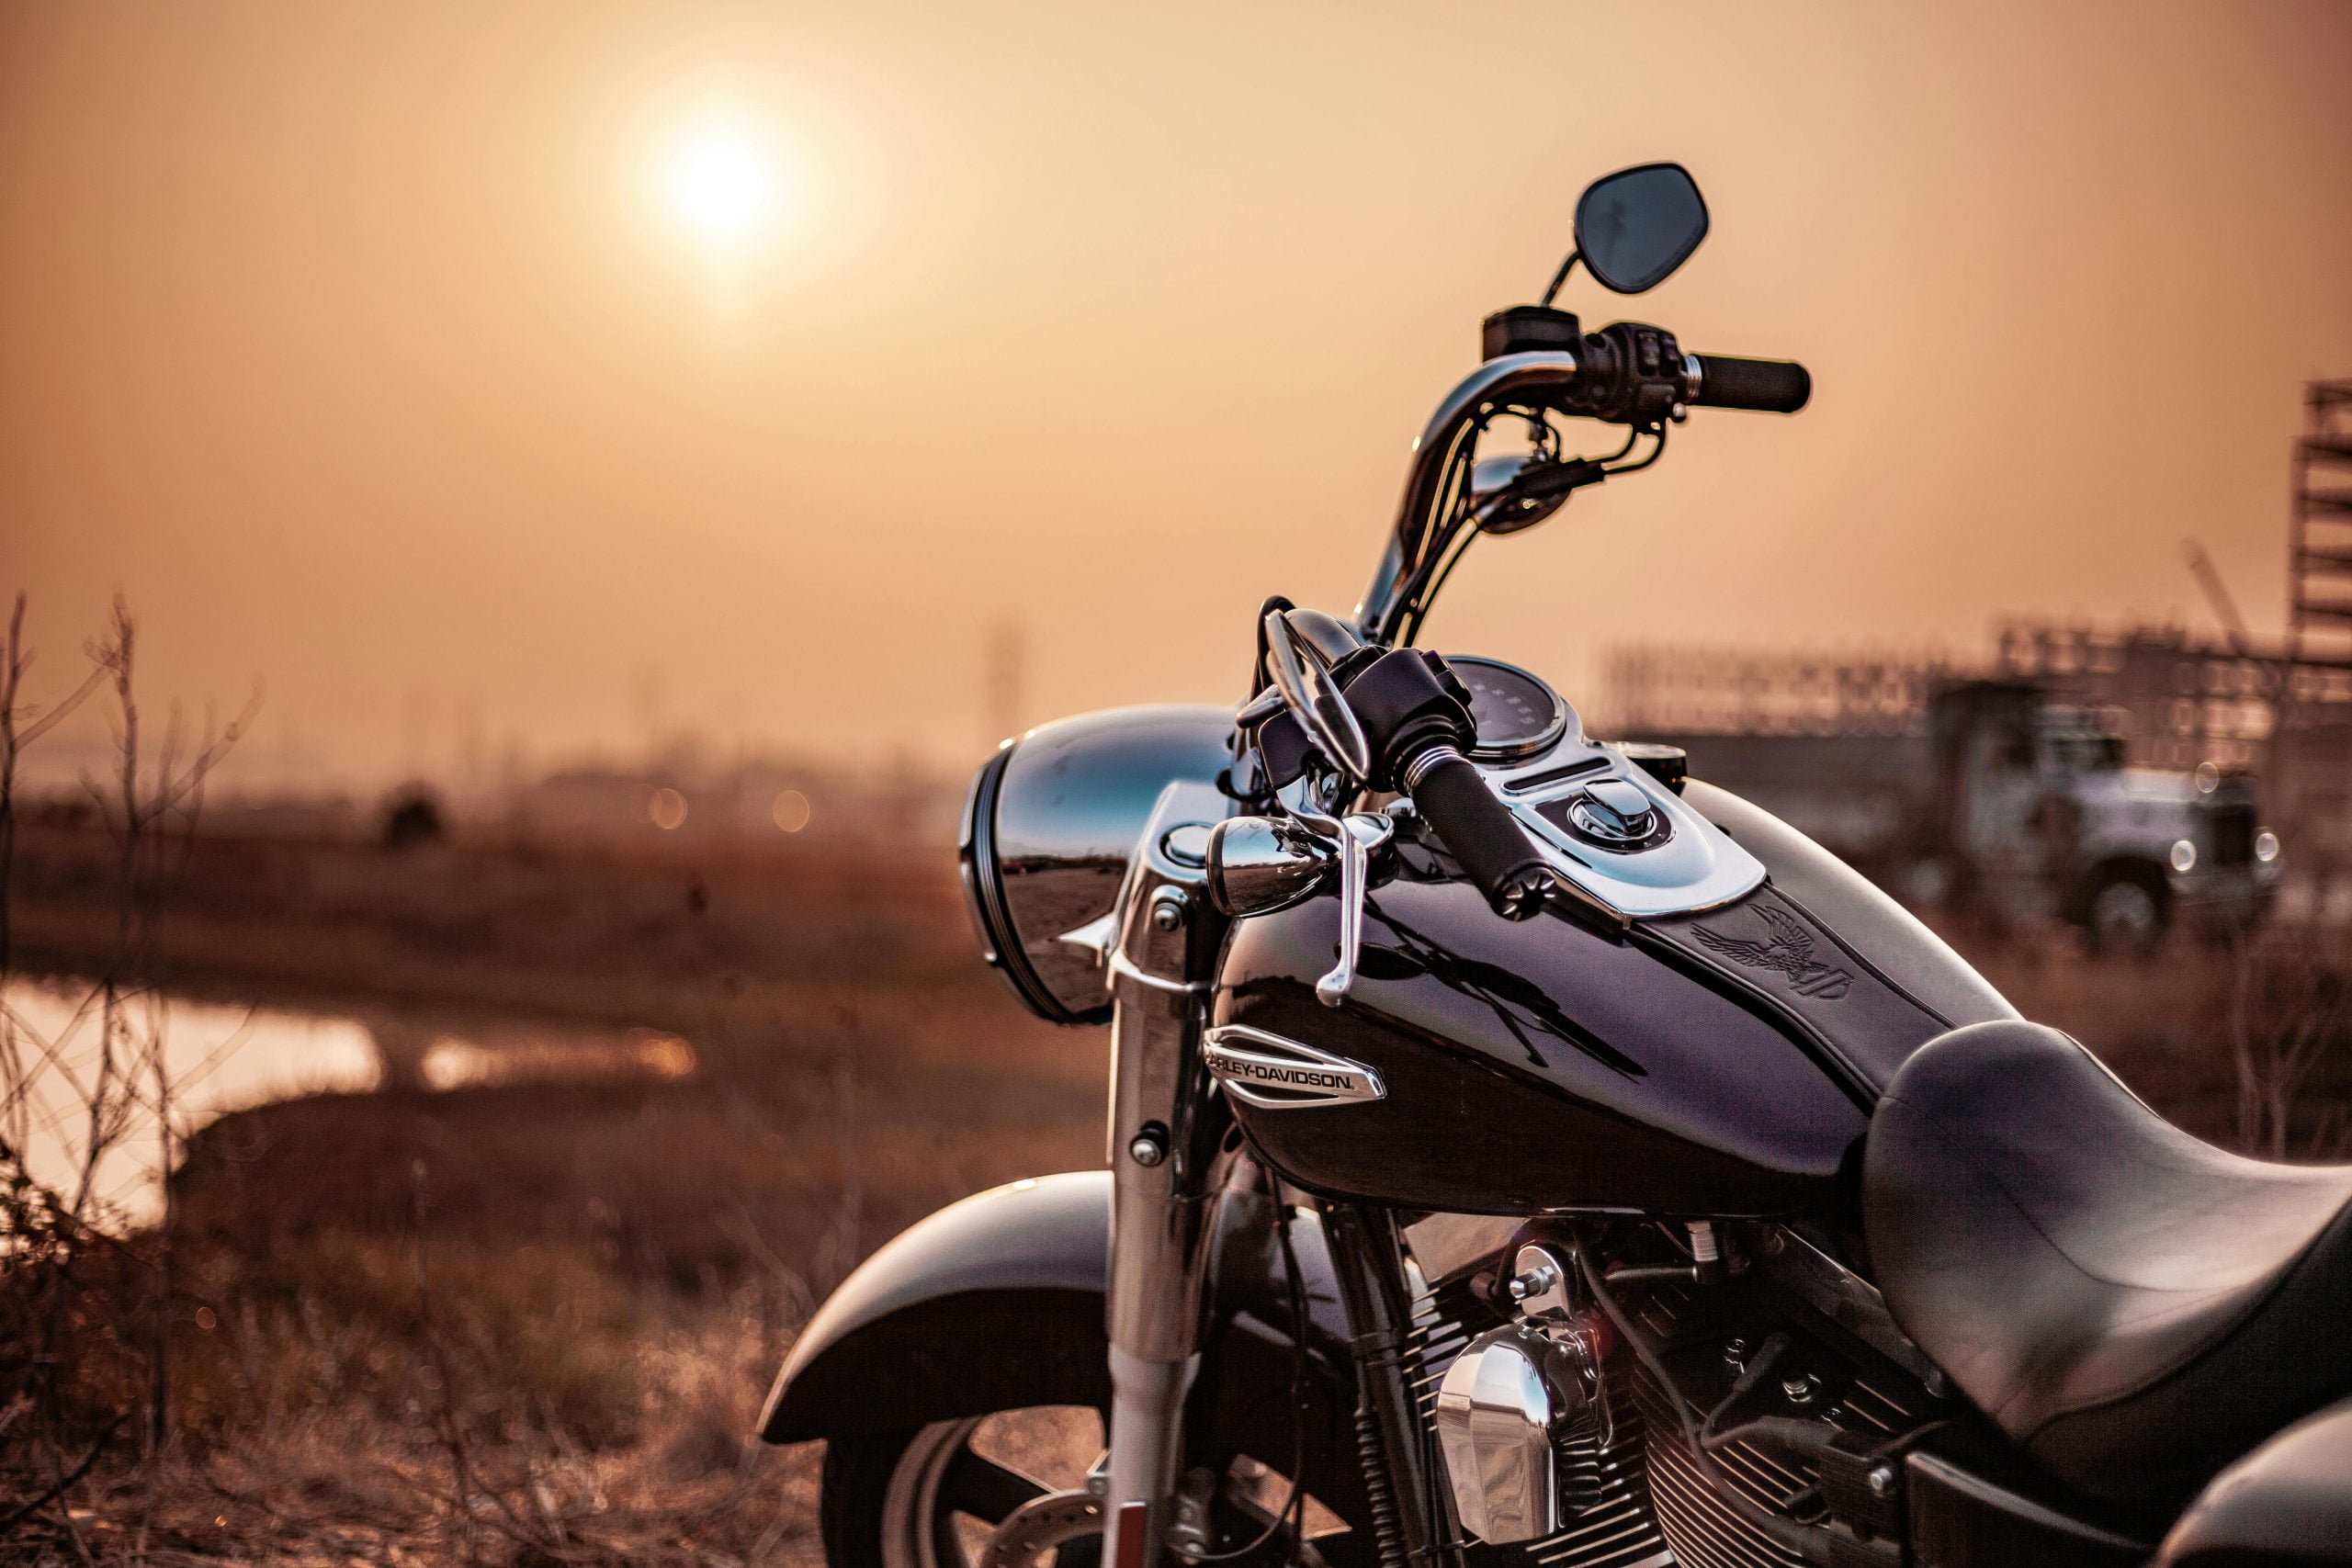 Maximizing Performance: Upgrades and Tune-Ups Offered by Motorcycle Service Shops